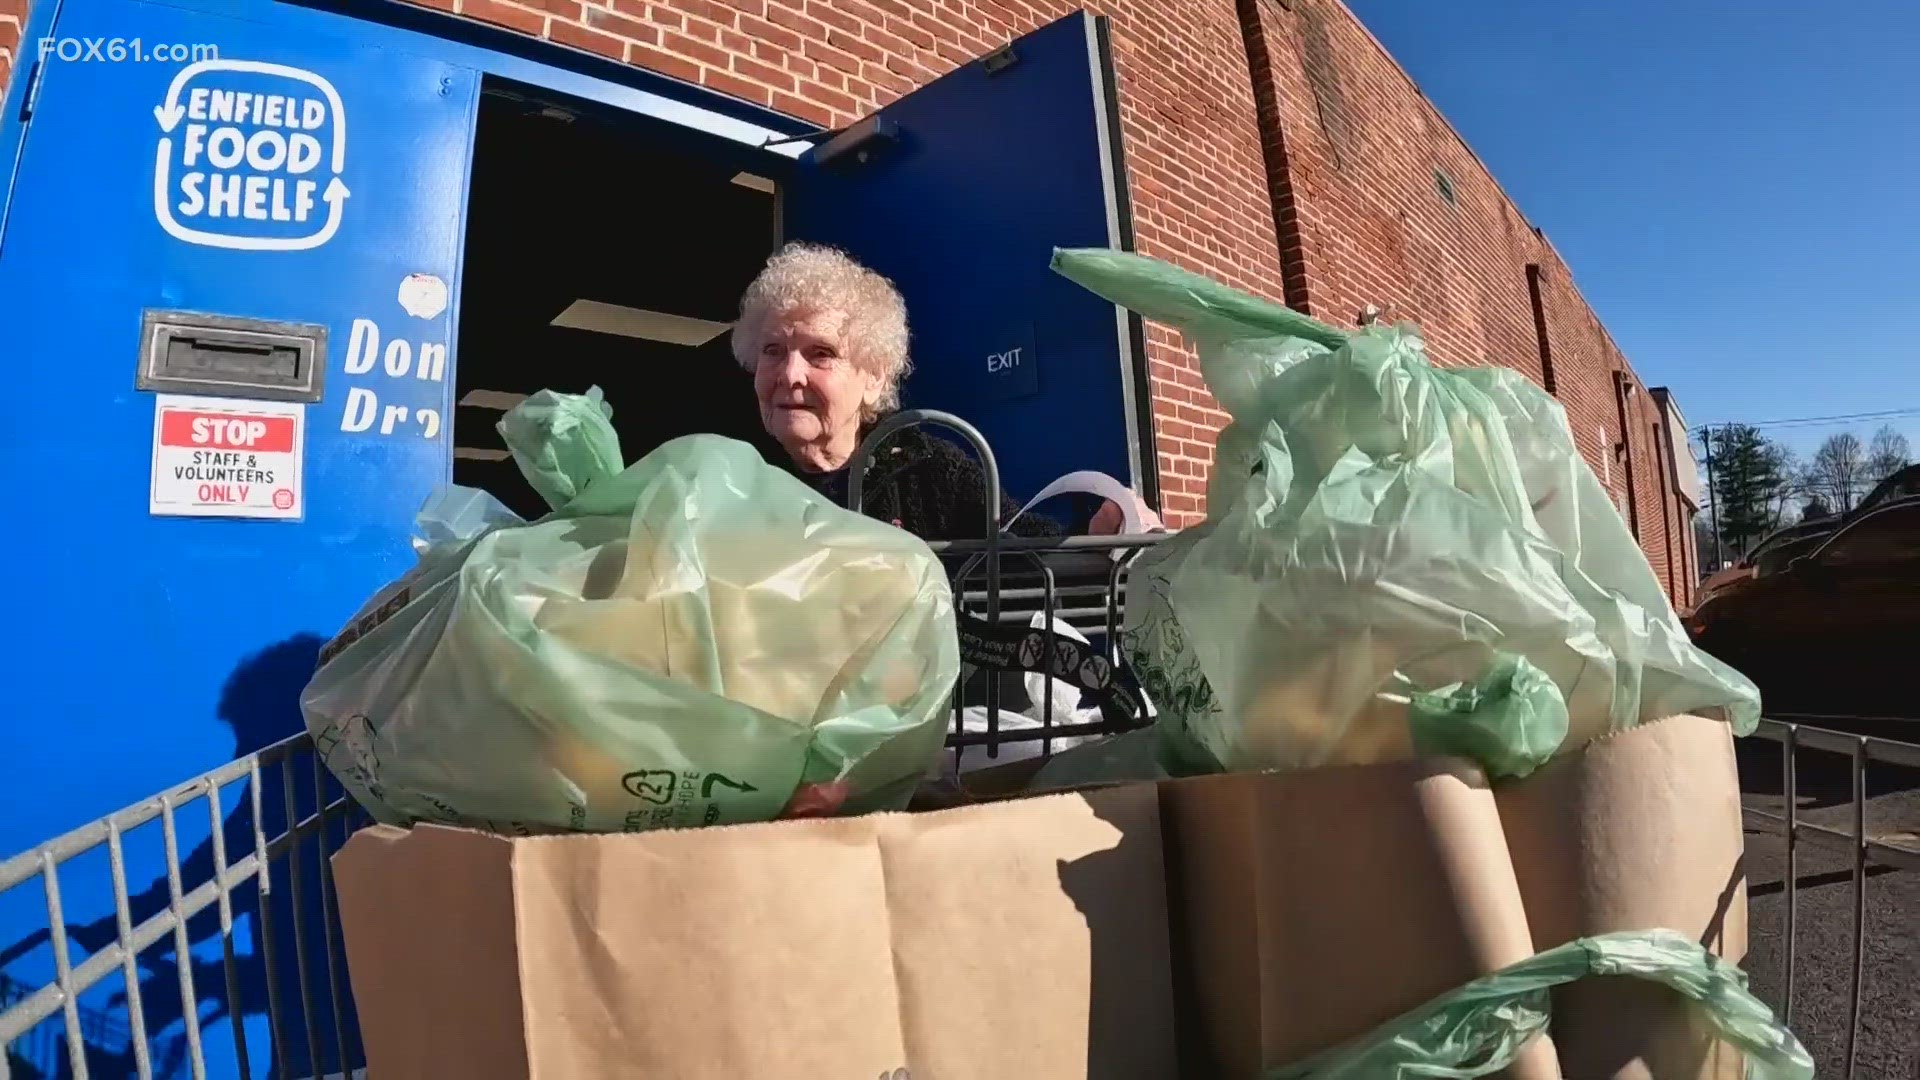 Barbara Costas has been helping the community for 55 years, leading the way in giving back.